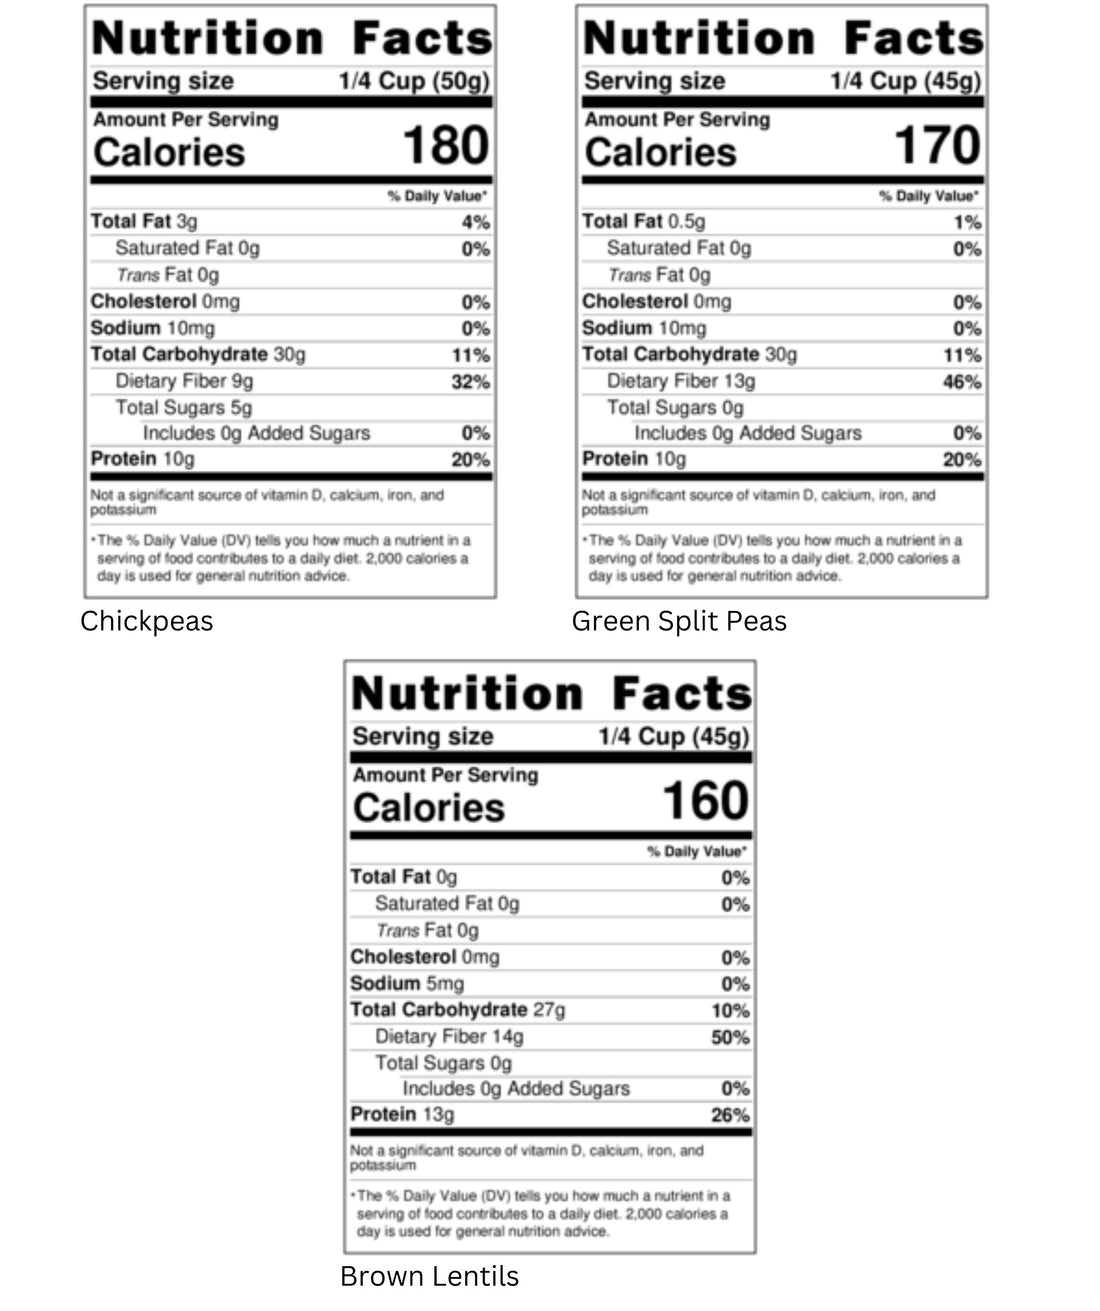 Nutrition Facts for Washington State Grown Chickpeas, Green Split Peas, and Brown Lentils